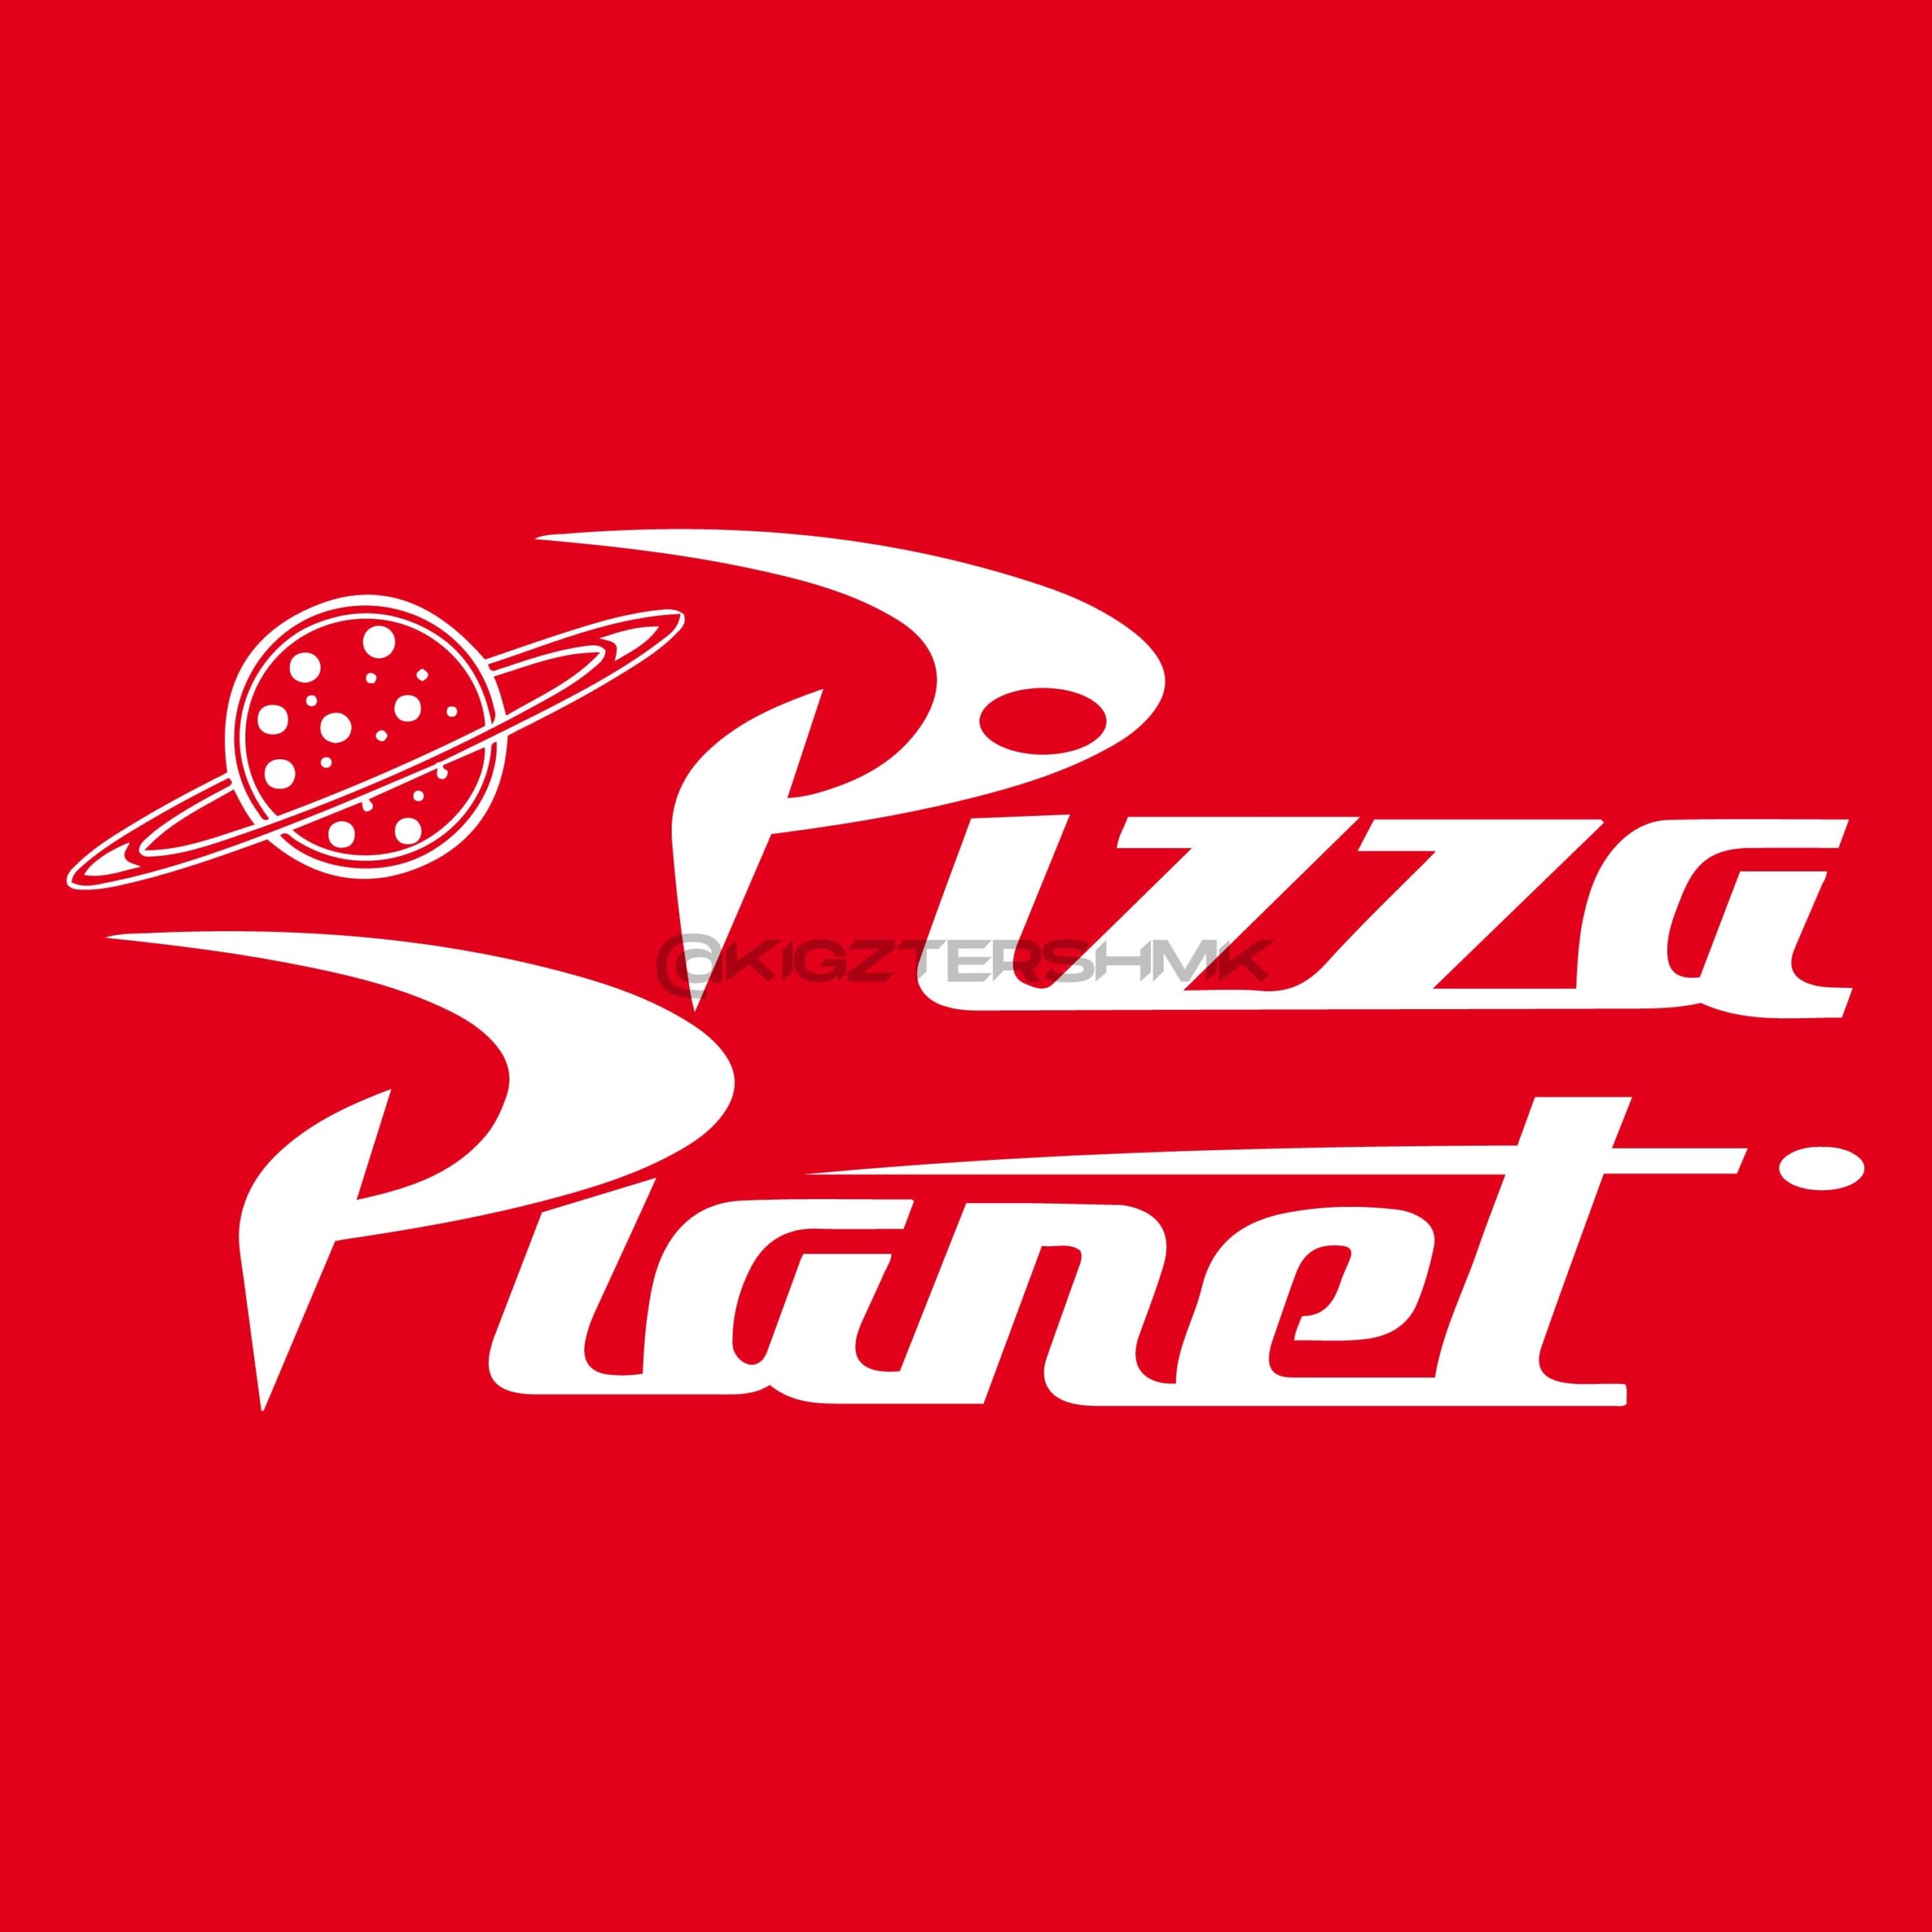 Pixar Toy Story Pizza Planet Logo Sticker decal Decoration PDF PNG Etsy